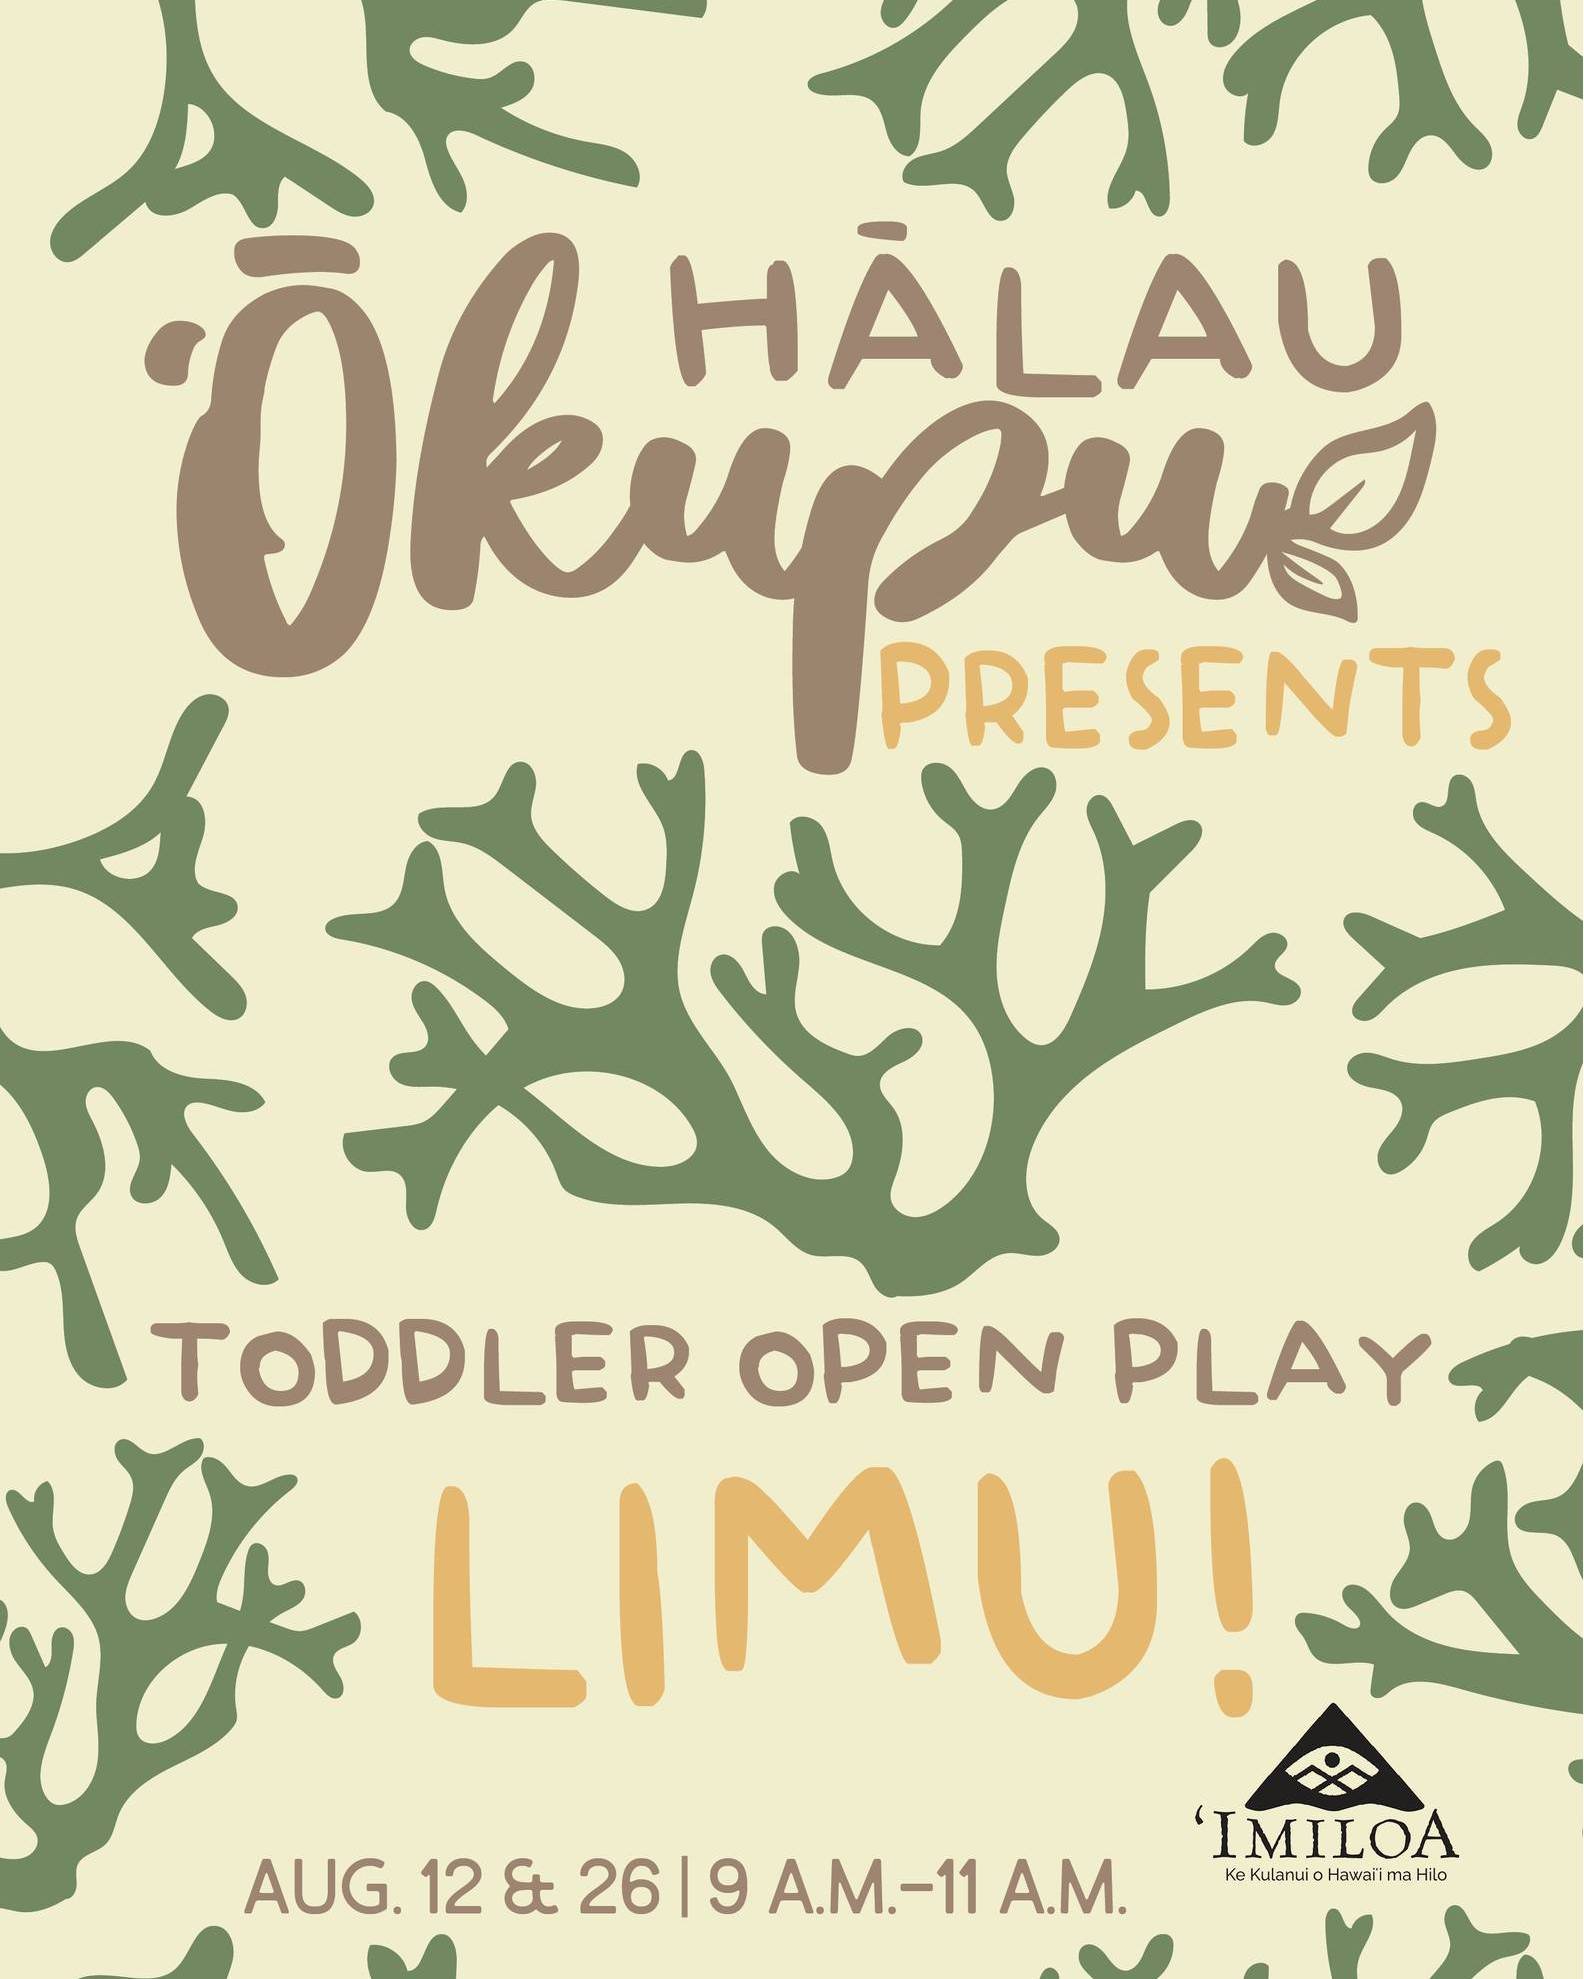 Save the date!

Registration for our August Hālau ʻŌkupu Play and Learn sessions opens on Monday, June 3. (Our June &amp; July sessions are currently full).

During the Aug. 12 &amp; 26 sessions, keiki ages 1-4 and their caregivers will explore the r